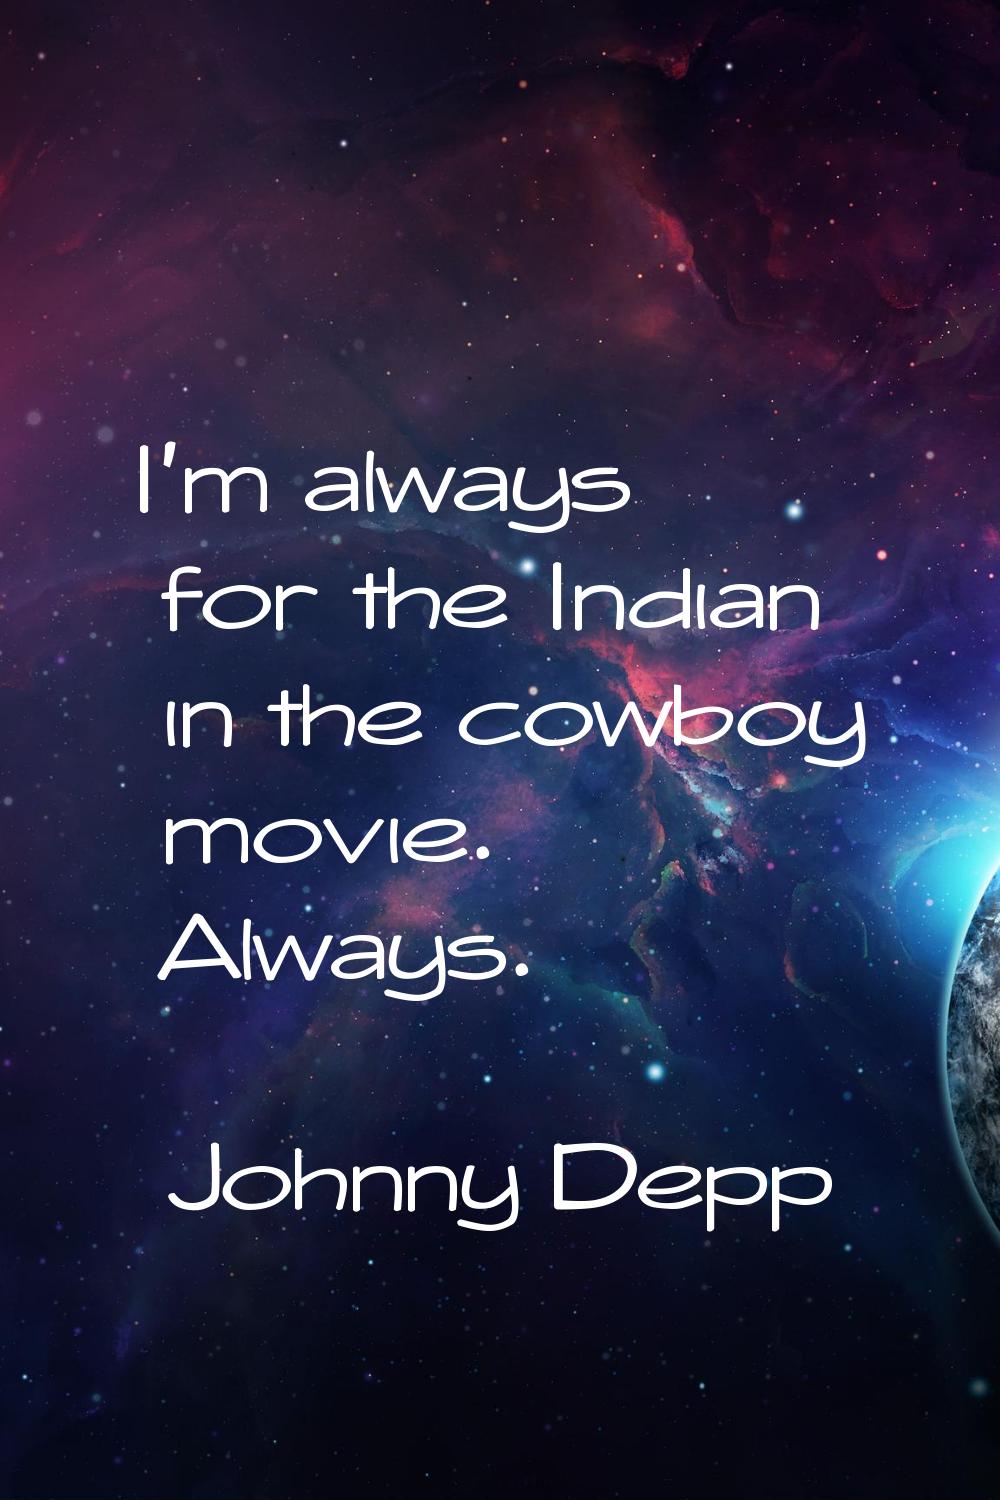 I'm always for the Indian in the cowboy movie. Always.